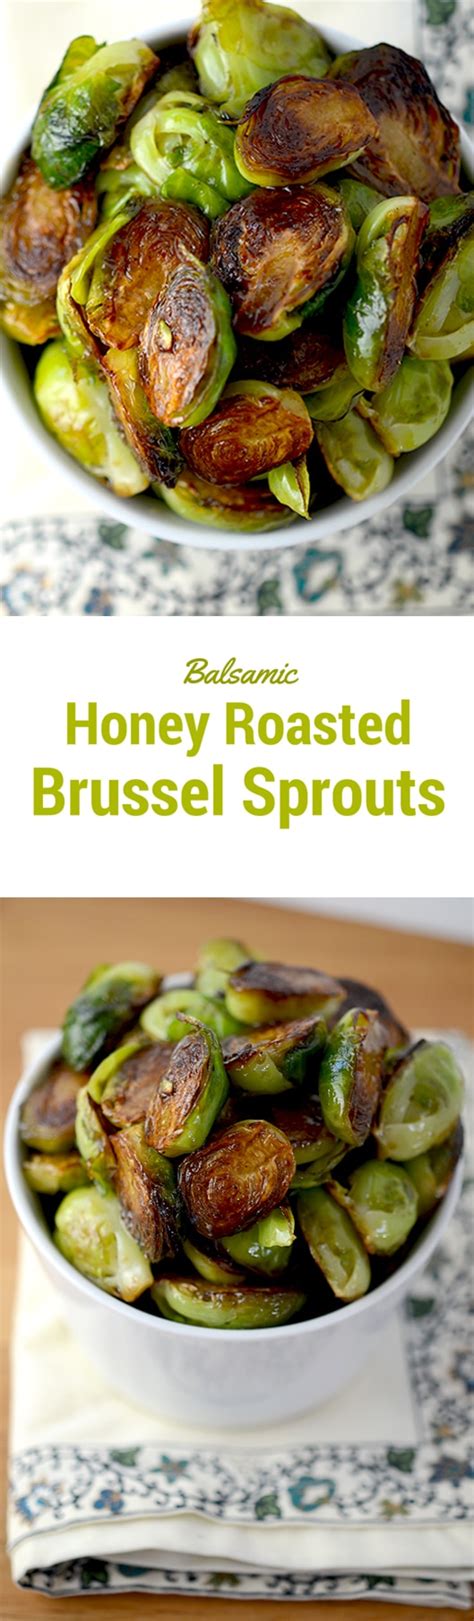 While making this roasted brussels spouts recipe with just olive oil, sea salt, and black pepper would make a tasty recipe, i like to add balsamic vinegar and raw honey to the brussels. Balsamic & Honey Roasted Brussels Sprouts Recipe